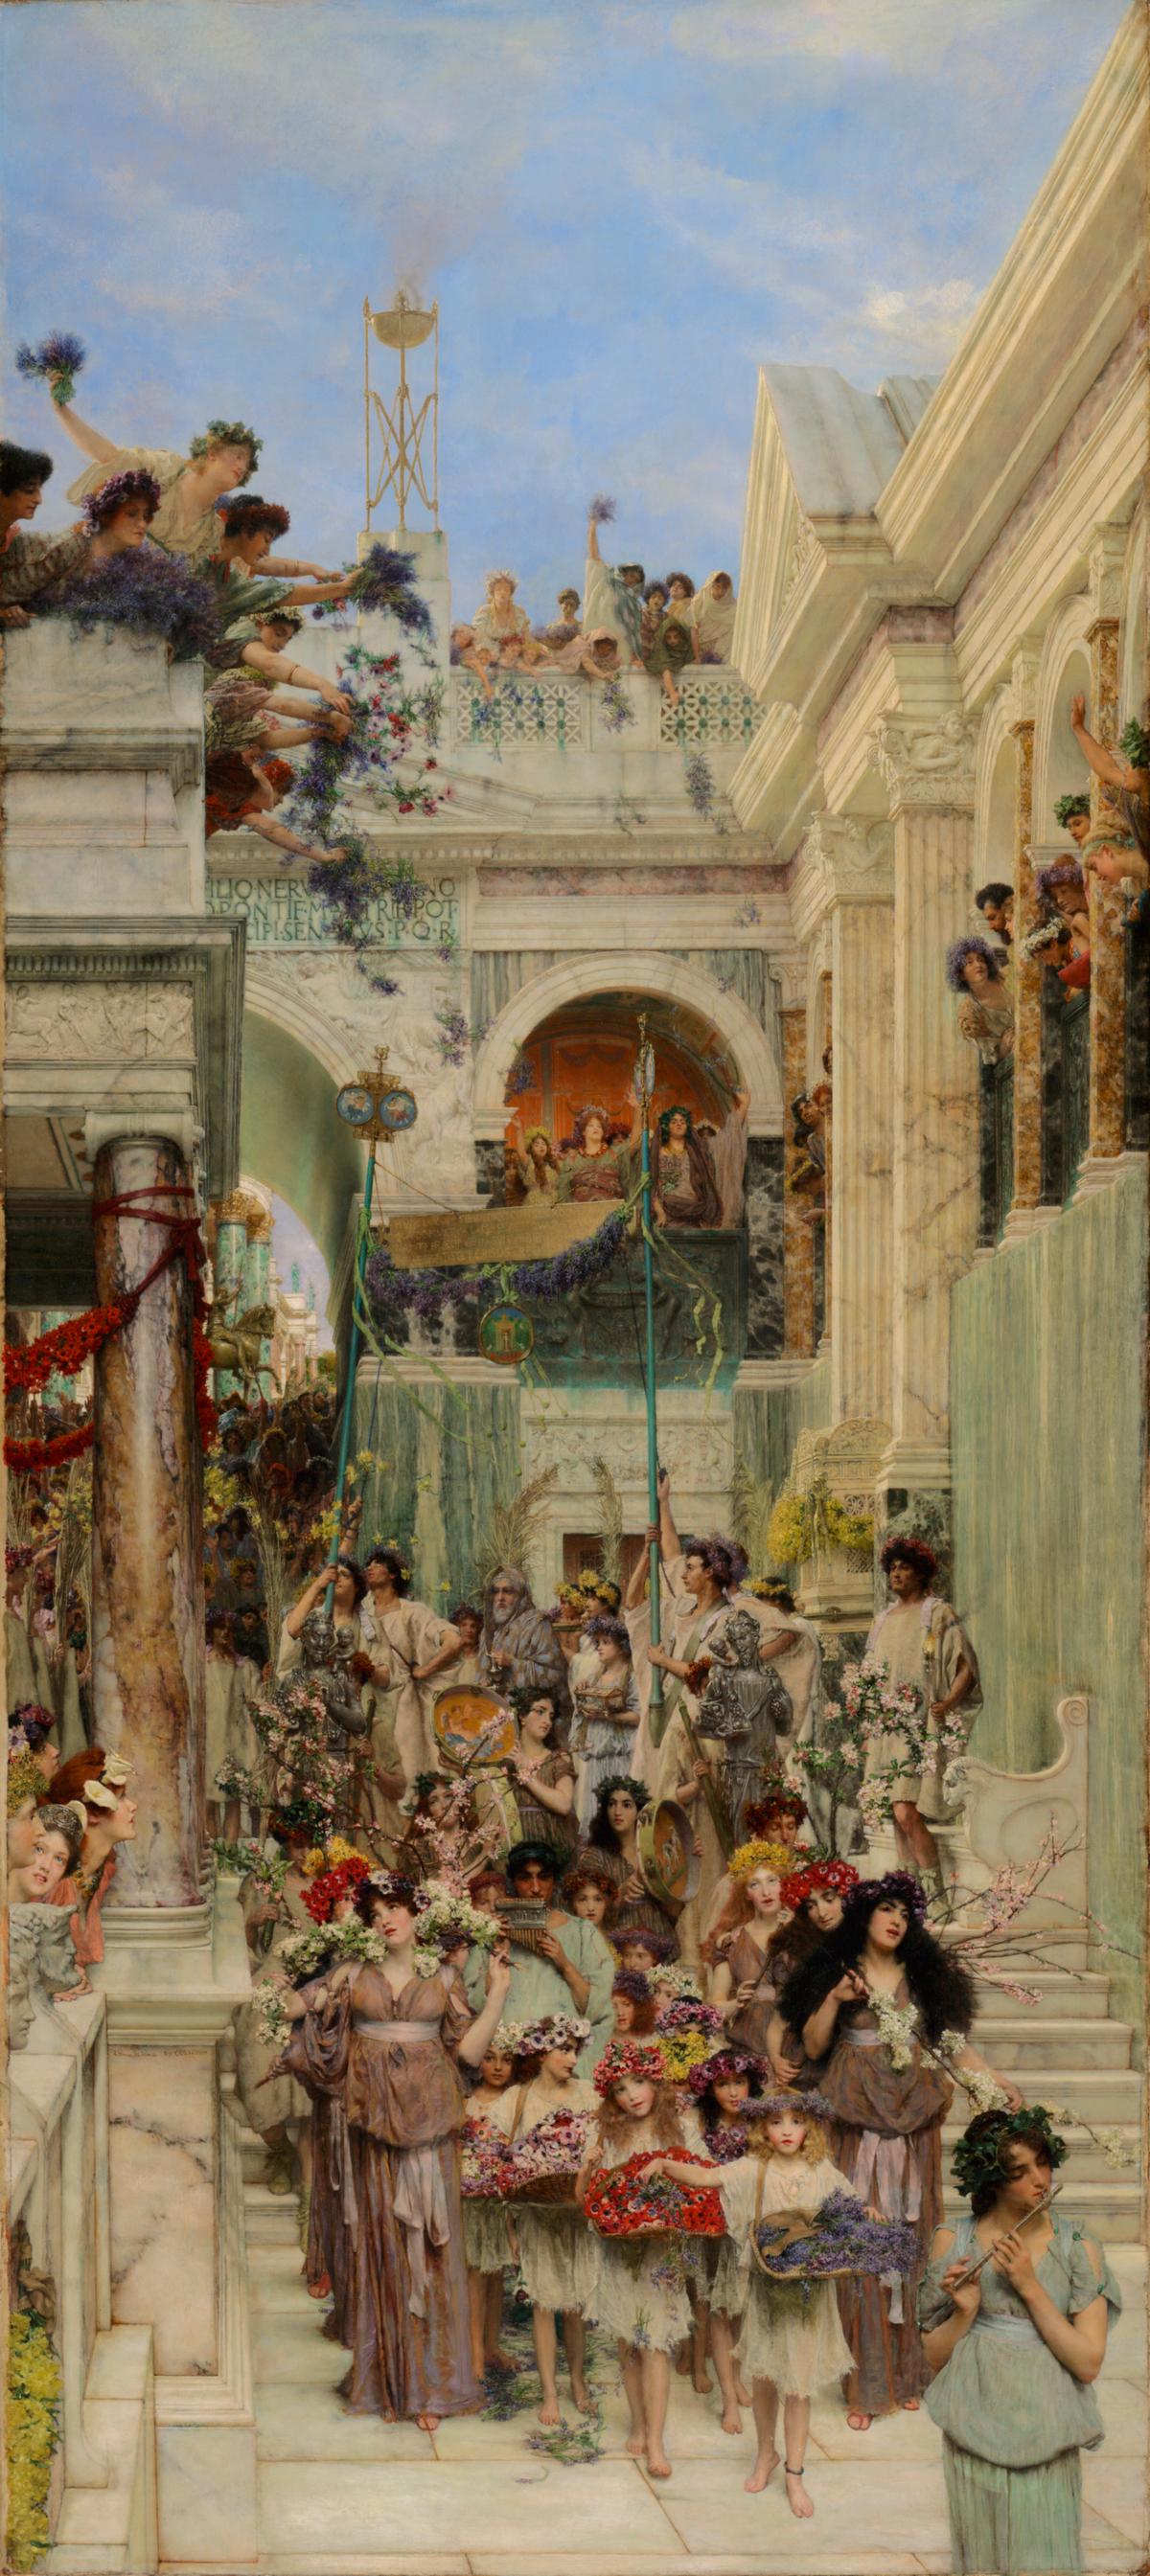 “Spring,” 1894, by Lawrence Alma-Tadema. Oil on canvas; 70 1/4 inches by 31 5/8 inches. The J. Paul Getty Museum, Los Angeles. (Public Domain)